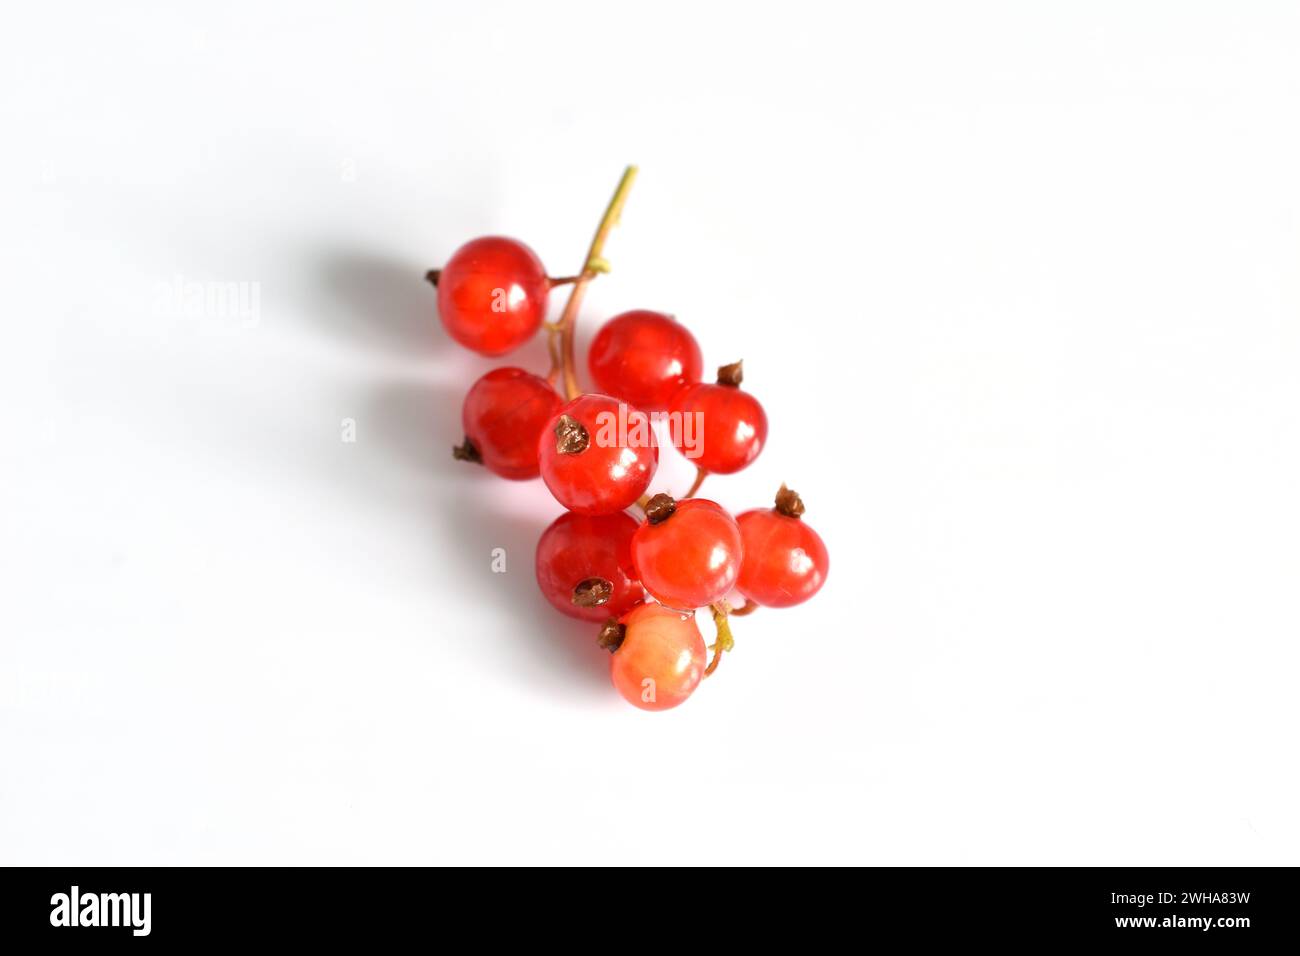 A branch with red currant berries, a wig, lie on a white background. Stock Photo